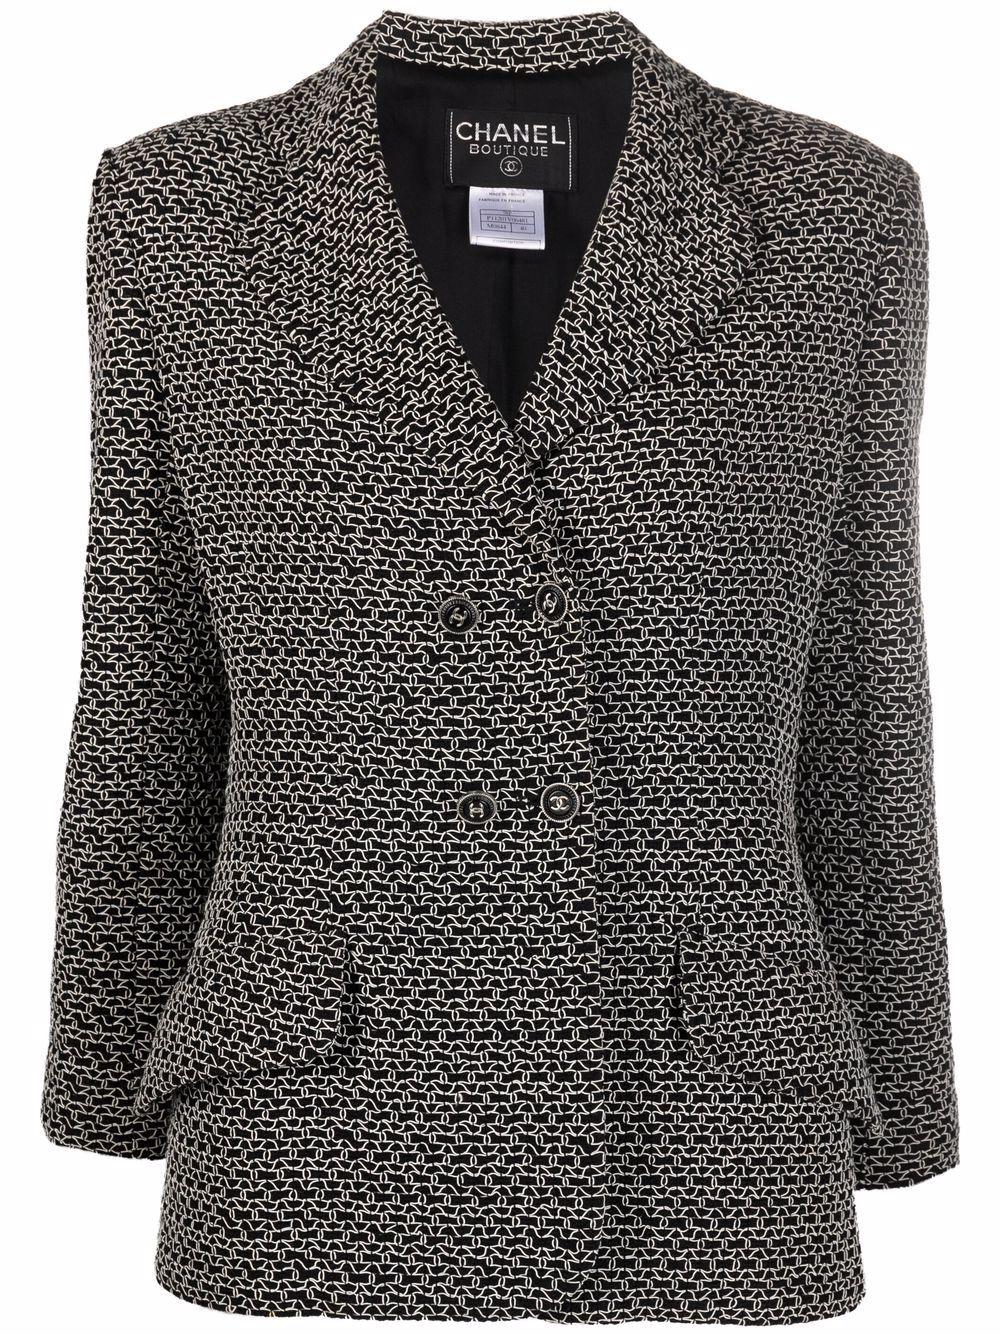 Chanel black boucle tweed double breasted jacket featuring white knitted net, fancy logo buttons, a silk lining. 
Circa 1998. 
See attached catwalk image.
Composition: Wool 51%, Viscose 44%, Nylon 5%
Lining: Silk 95%, Lycra 5%
Estimated size